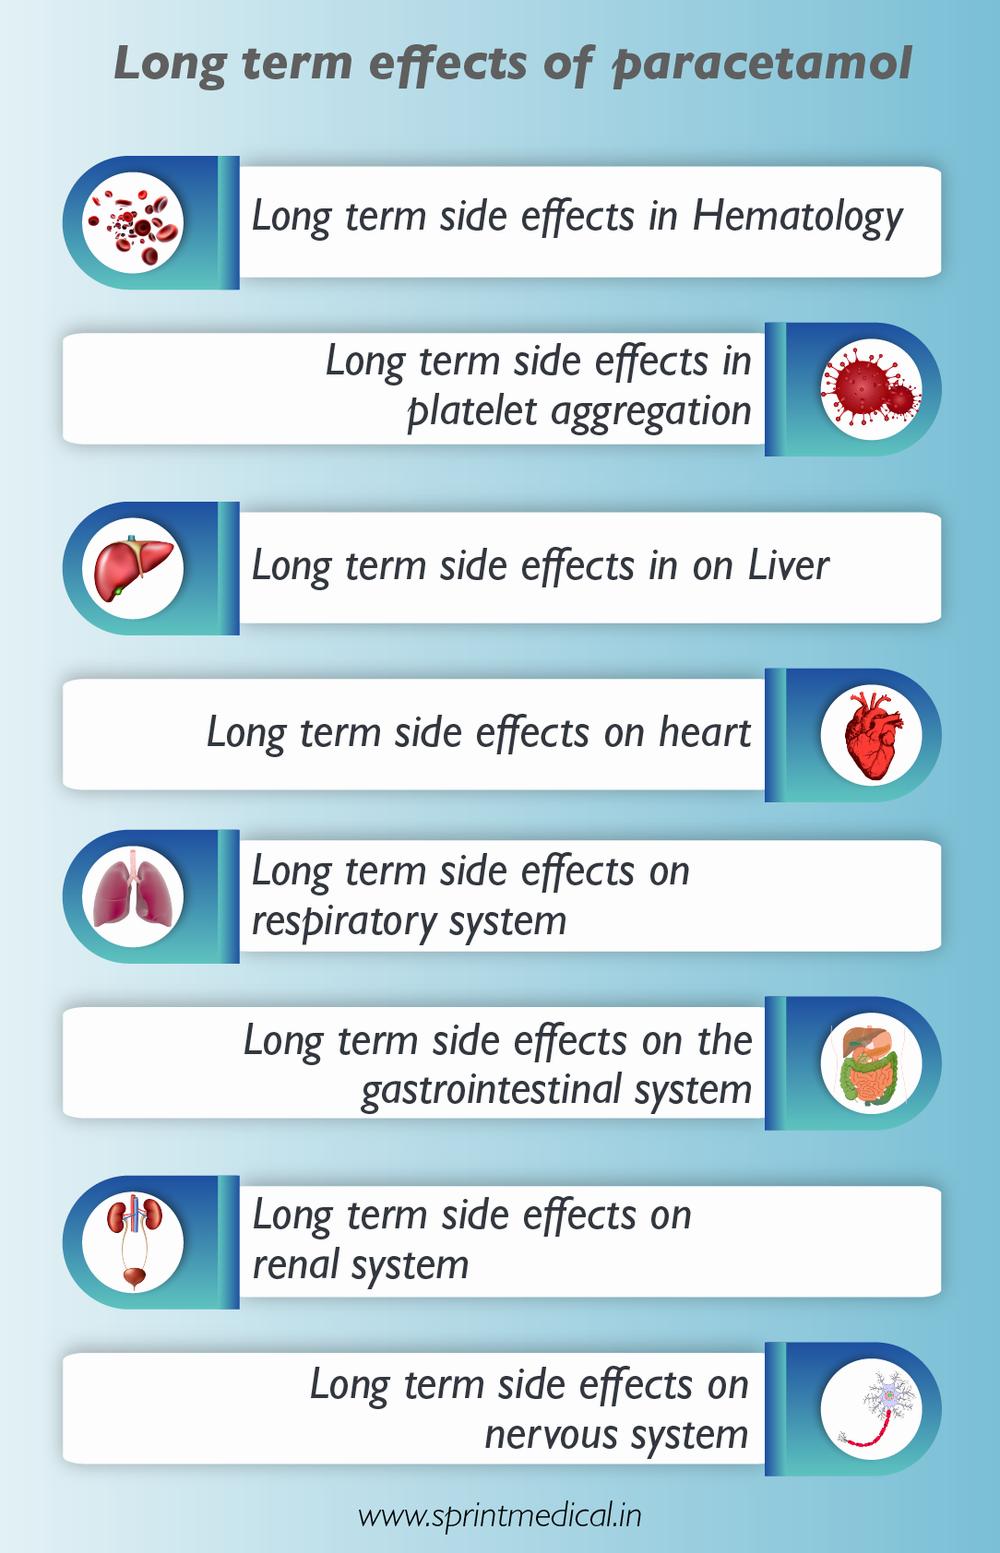 A list of the long-term side effects of paracetamol on various systems in the body.